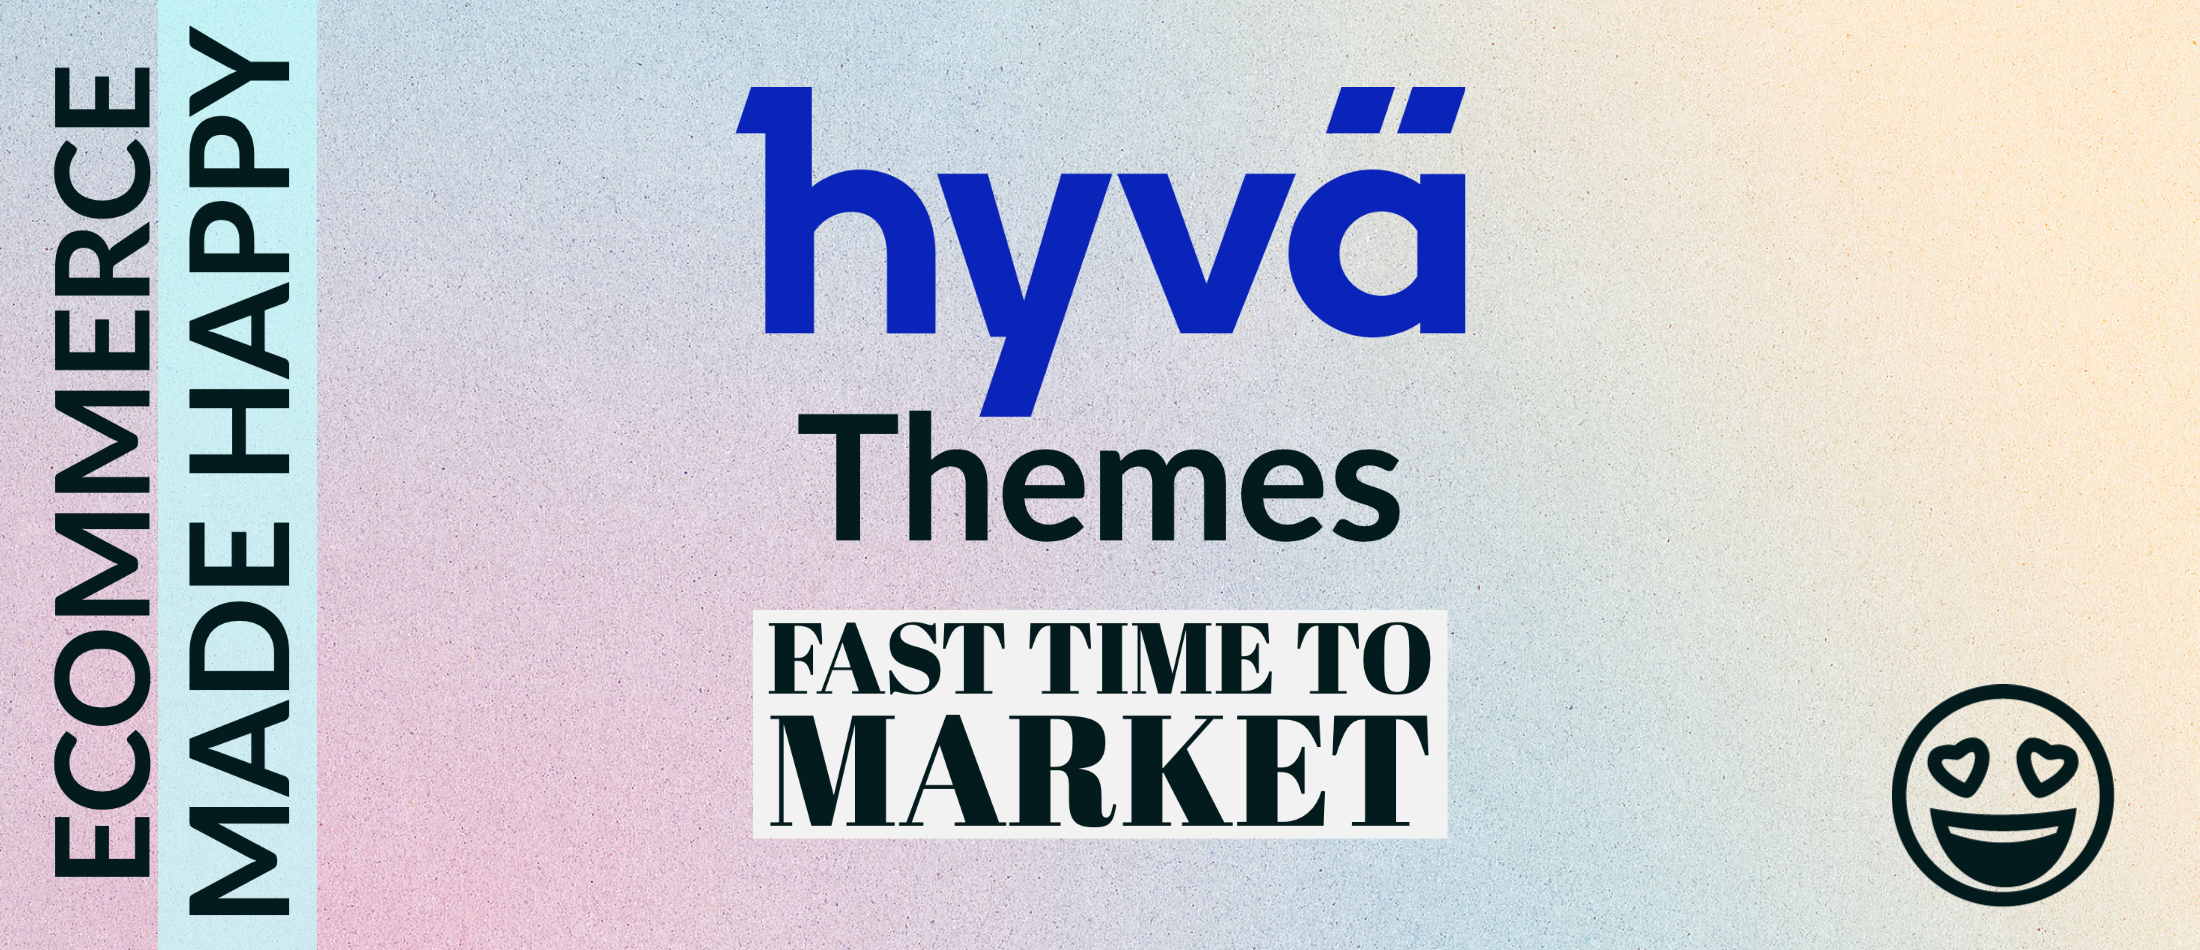 Hyva themes fast time to market